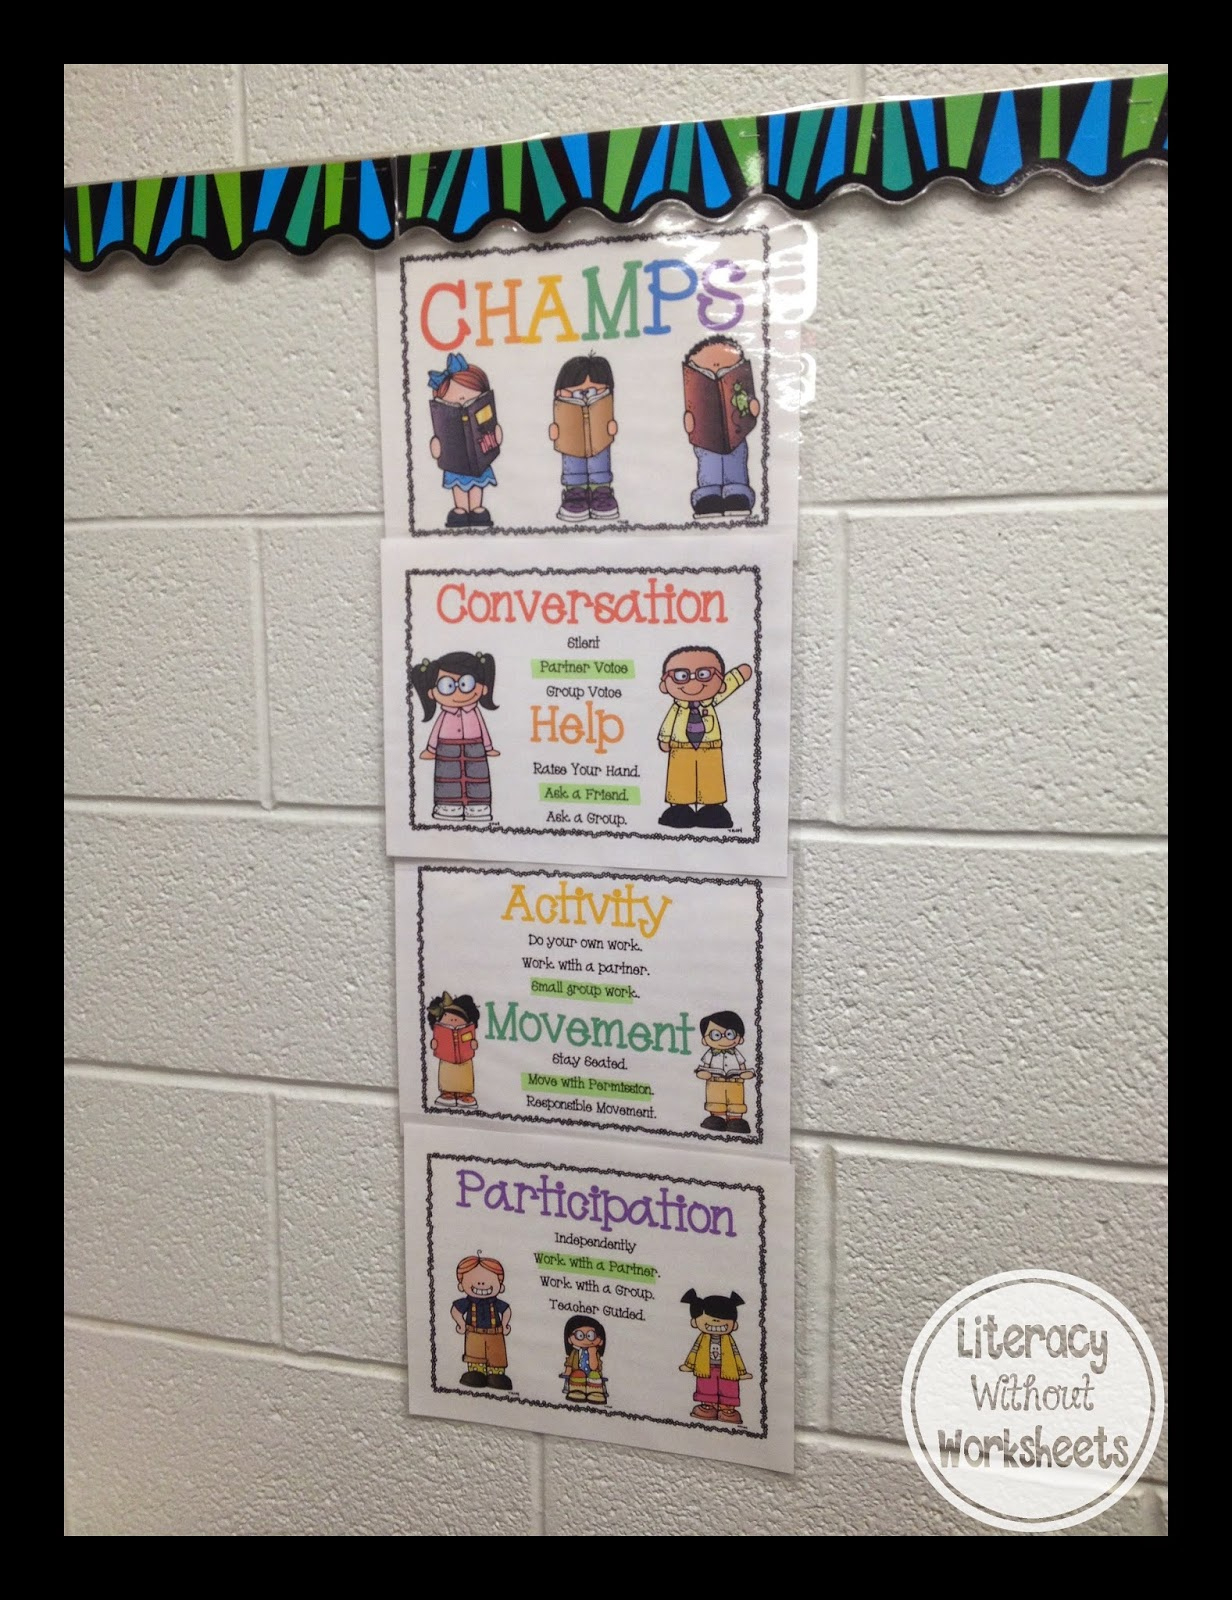 Amazing Champs Classroom Management And Discipline Plan Template